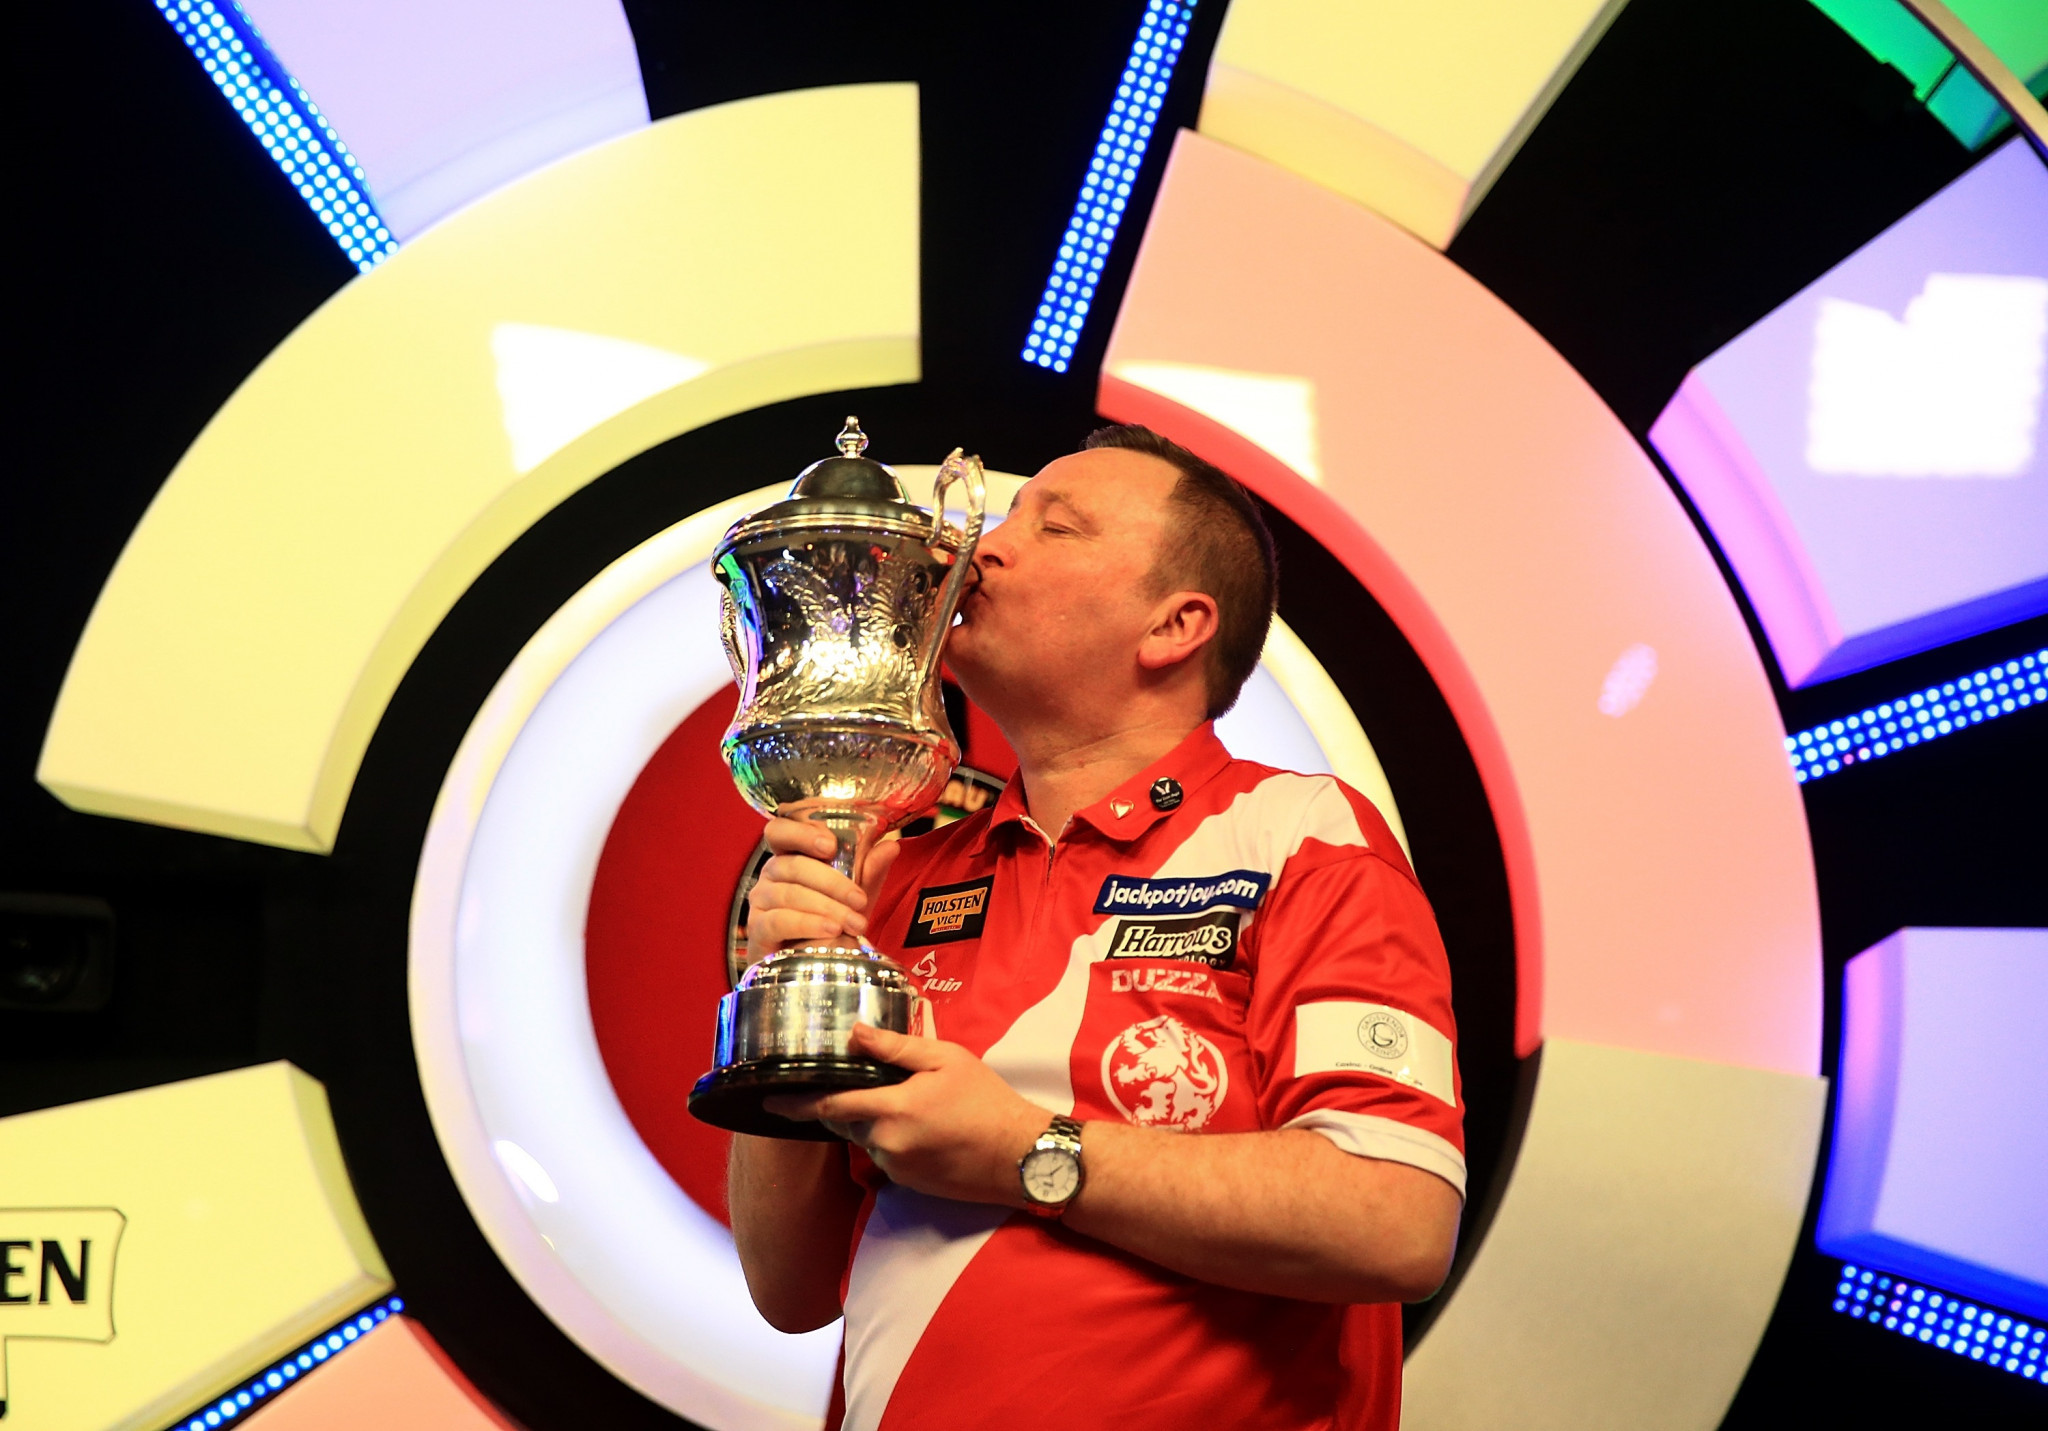 The 2018 BDO World Championship is due to begin tomorrow with Glen Durrant looking to defend the men’s title ©Getty Images